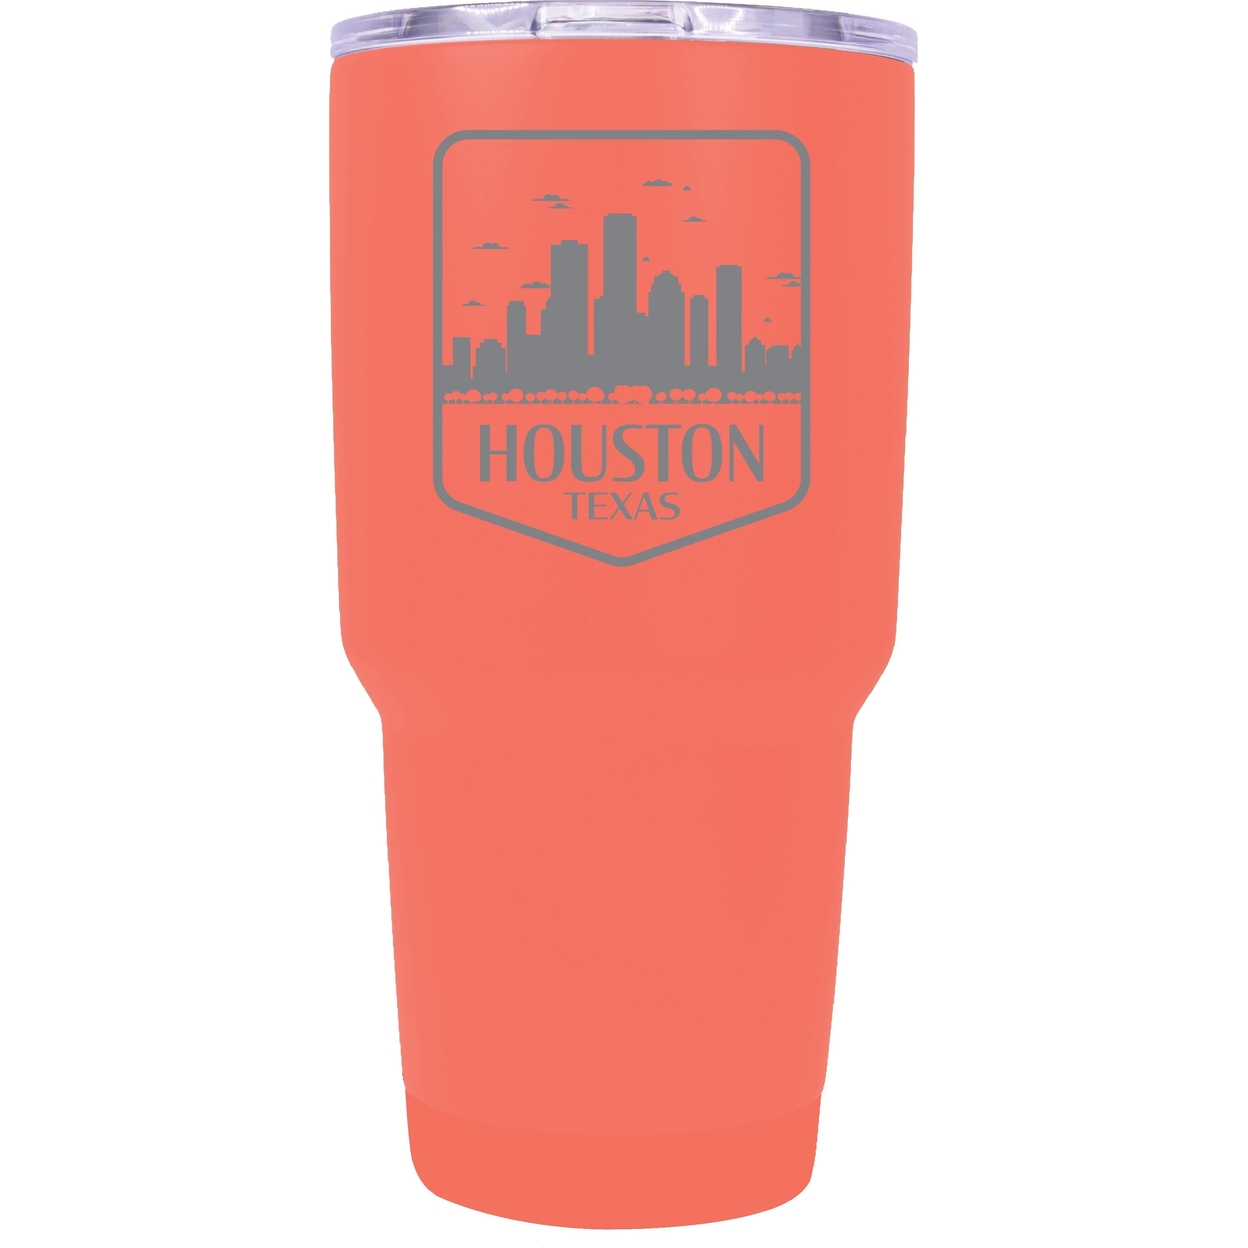 Houston Texas Souvenir 24 Oz Engraved Insulated Stainless Steel Tumbler - Coral,,2-Pack